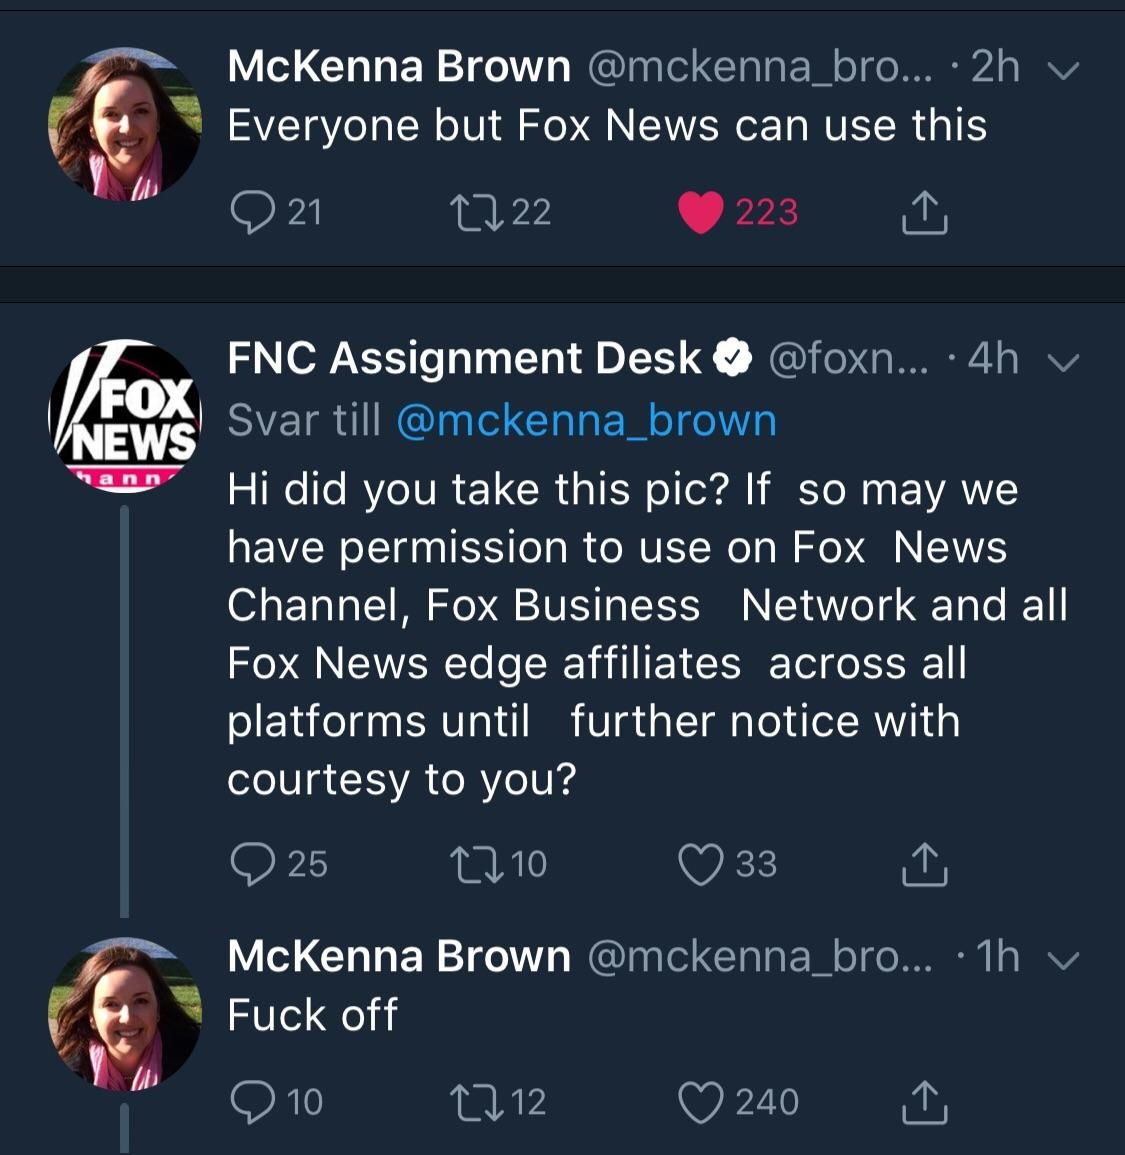 Anyone but Fox News can use this.